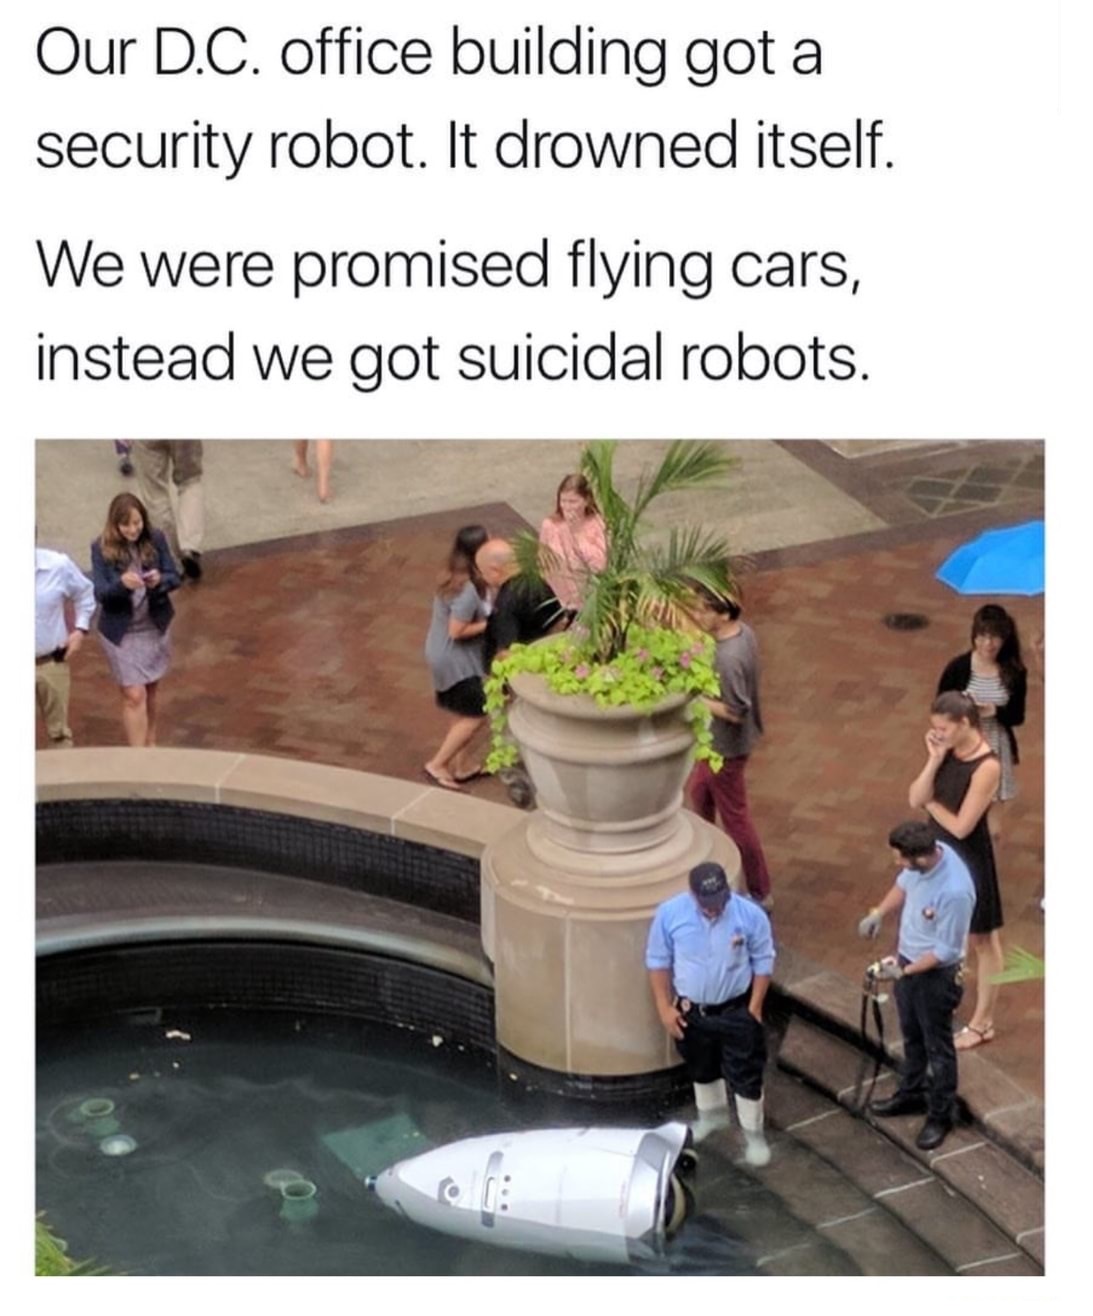 security robot suicide - Our D.C. office building got a security robot. It drowned itself. We were promised flying cars, instead we got suicidal robots.